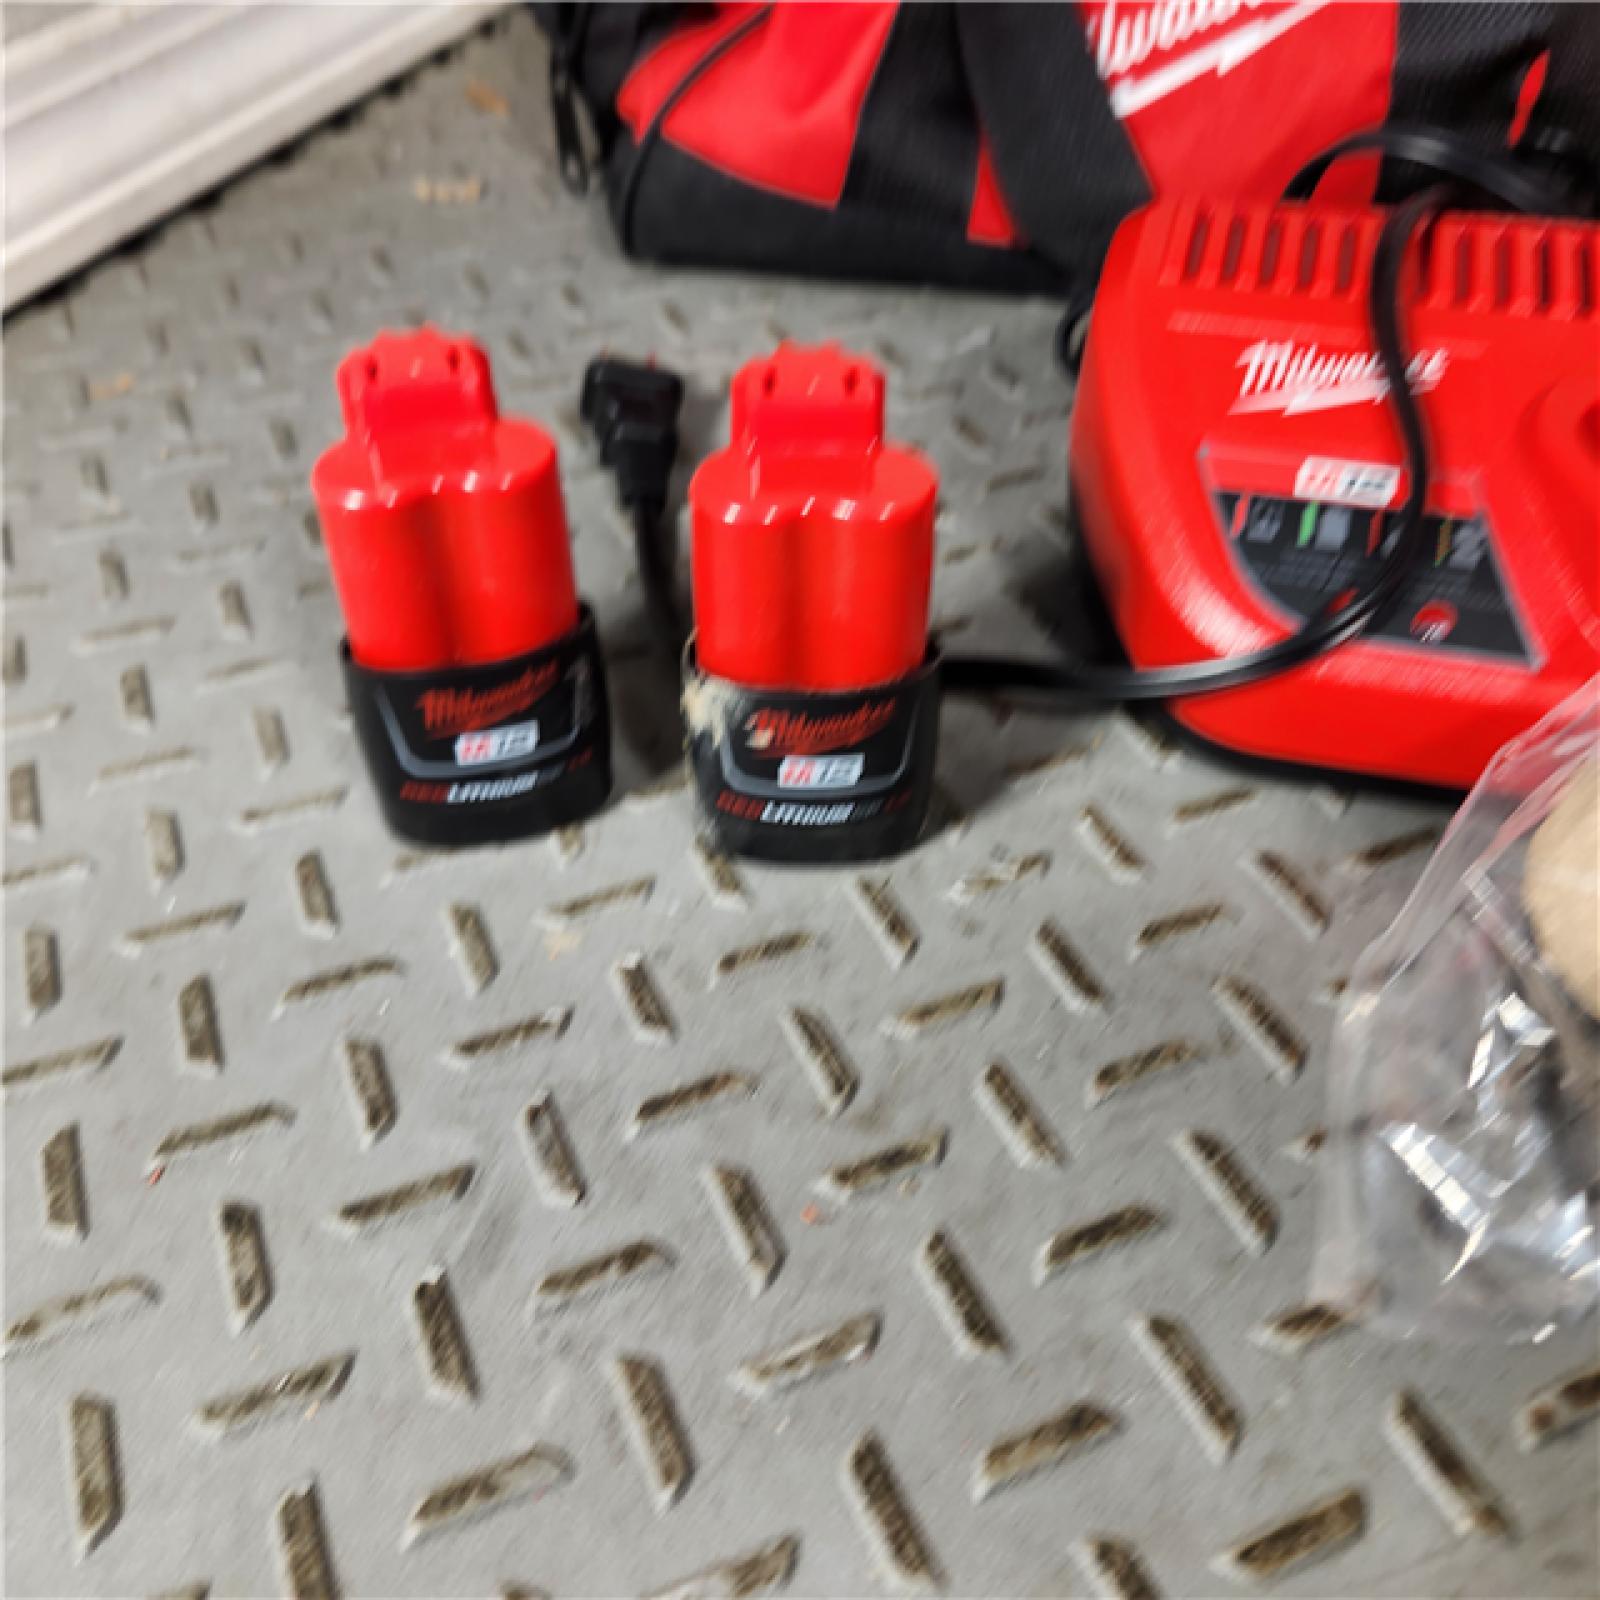 Houston Location - AS-IS Milwaukee 2-Tool M12 12V Lithium-Ion Drill/Driver & Impact Driver Cordless Tool Combo Kit - Appears IN NEW Condition